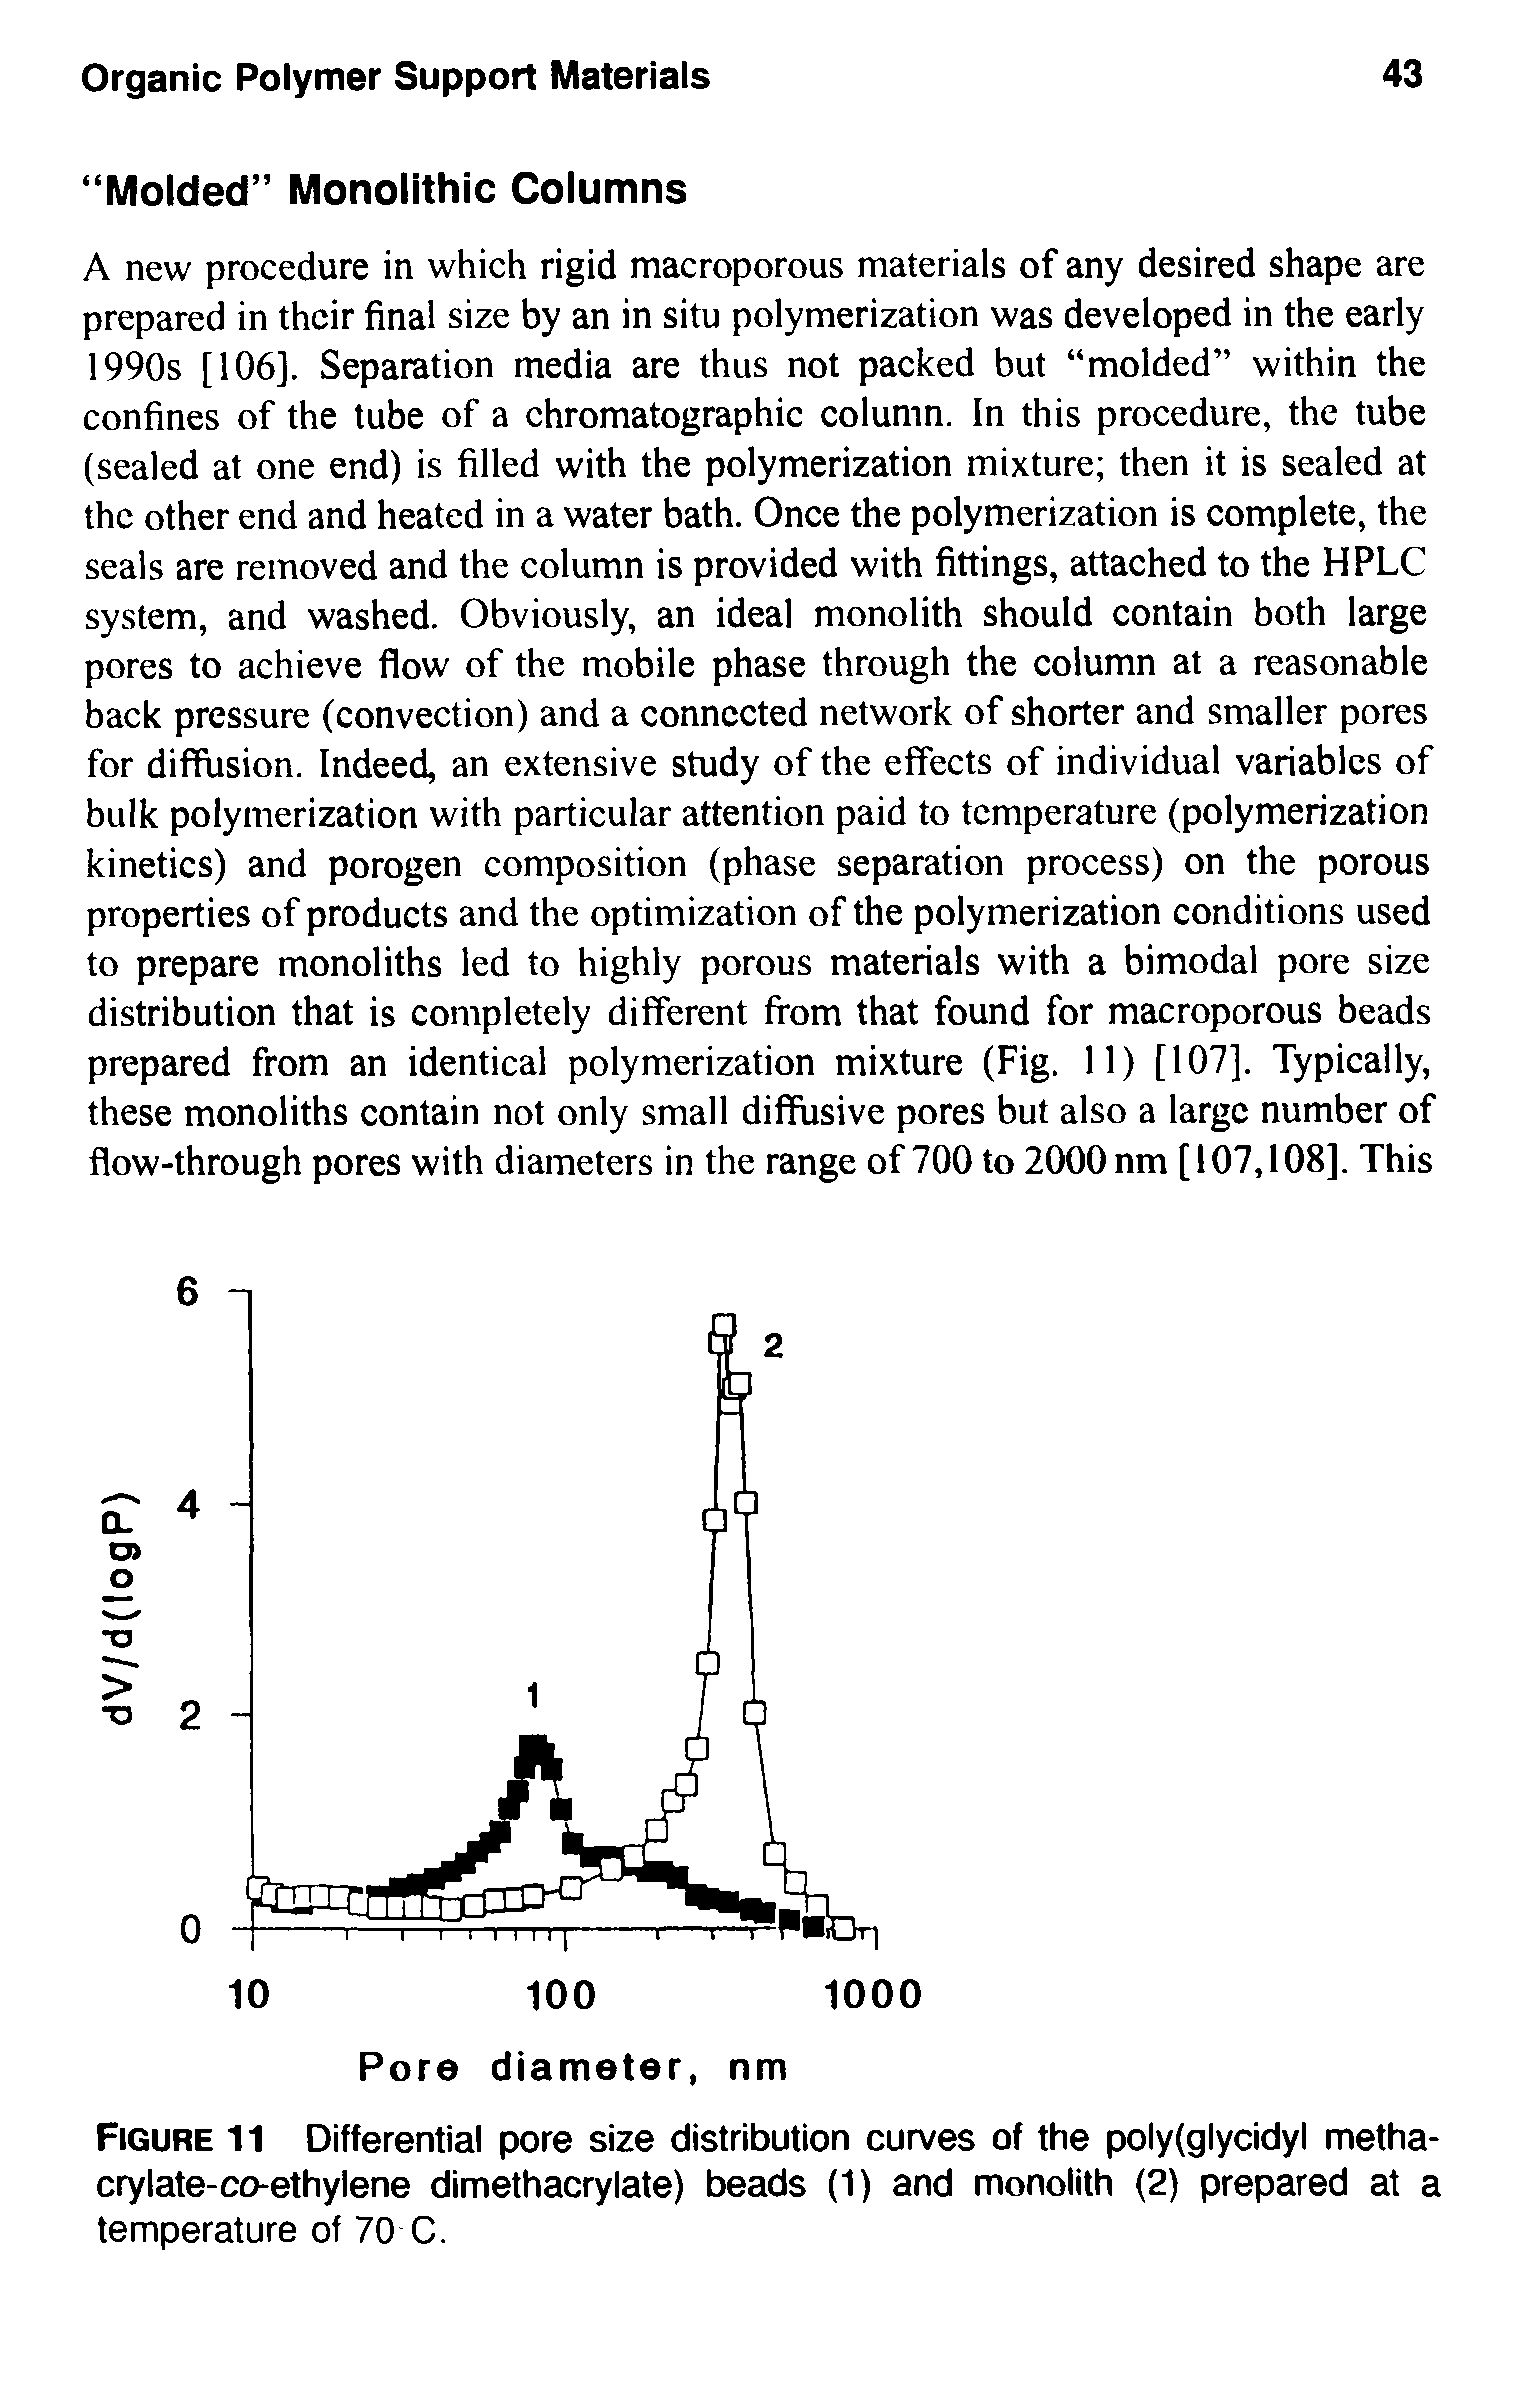 Figure 11 Differential pore size distribution curves of the poly(glycidyl methacrylate-co-ethylene dimethacrylate) beads (1) and monolith (2) prepared at a temperature of 70 C.